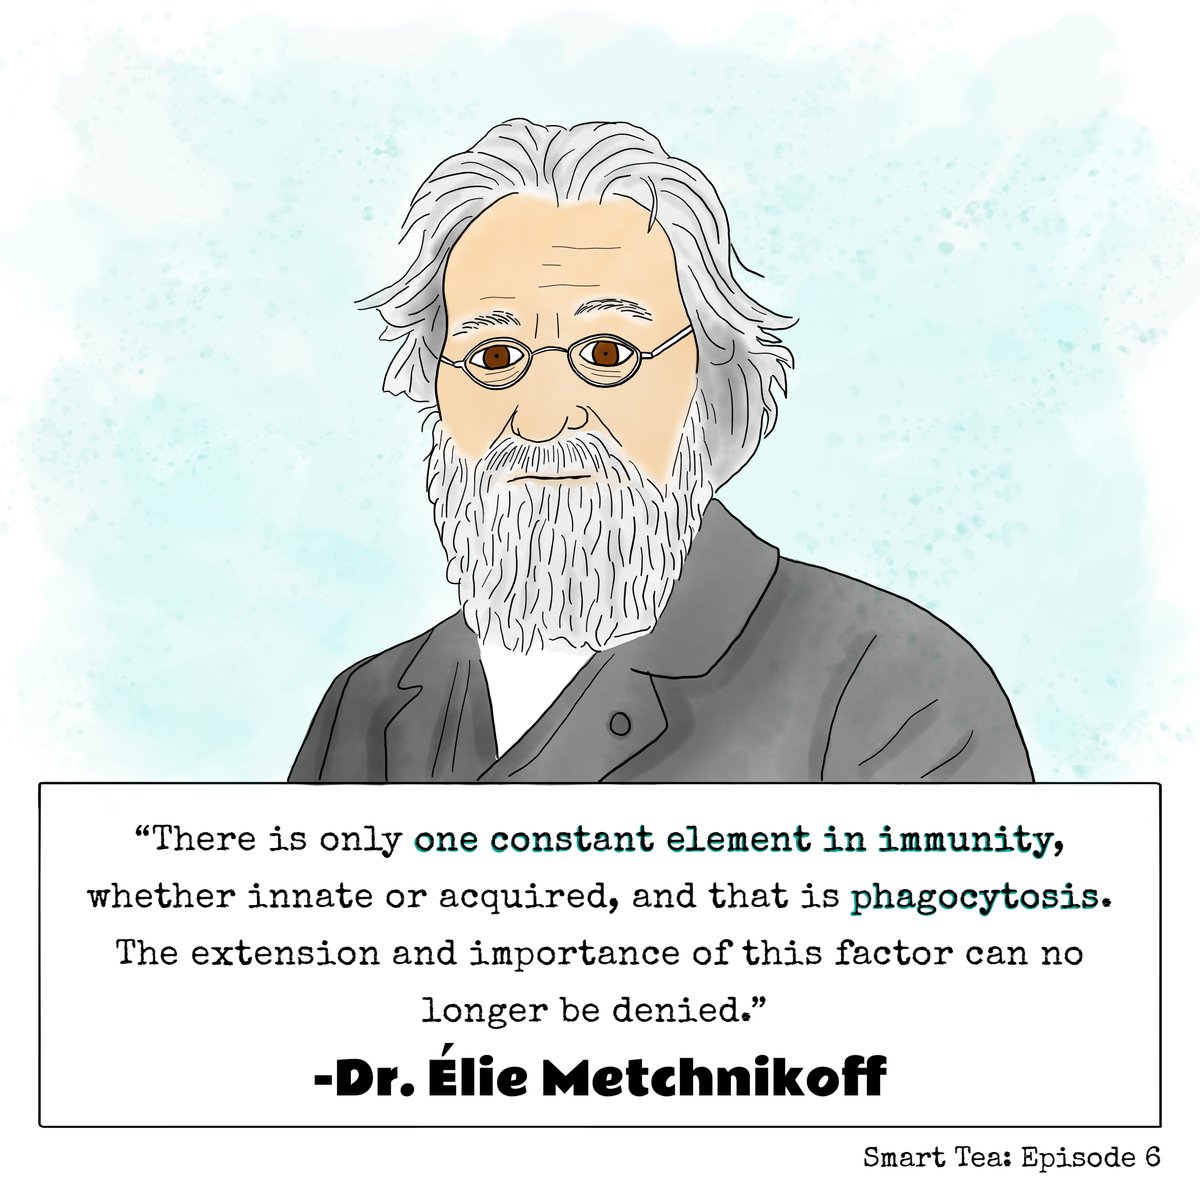 Phagocytosis is a process in which a cell engulfs a particle. Dr. Metchnikoff won the #nobelprize for discovering that we have specialized cells that use phagocytosis to eliminate invaders that might make us sick. Listen to the full episode wherever you get your #podcasts!